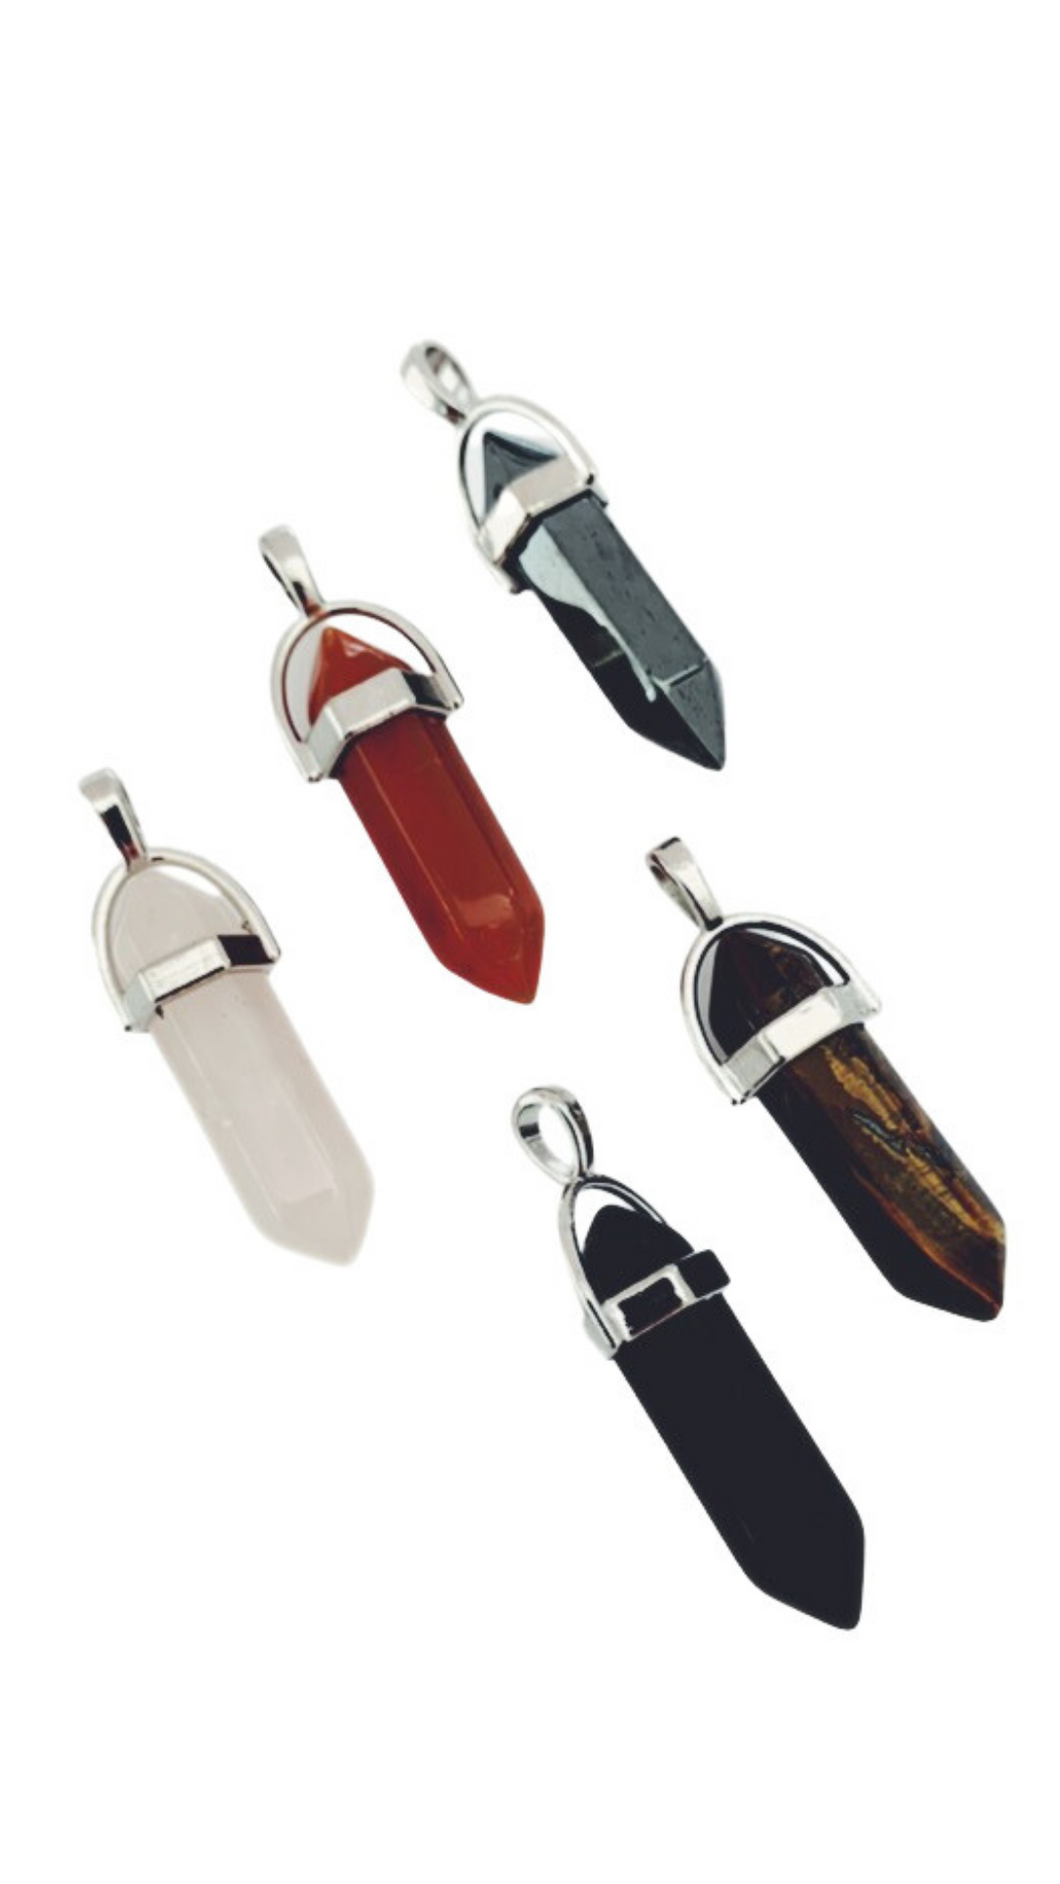 Crystal double terminated pendants for necklaces